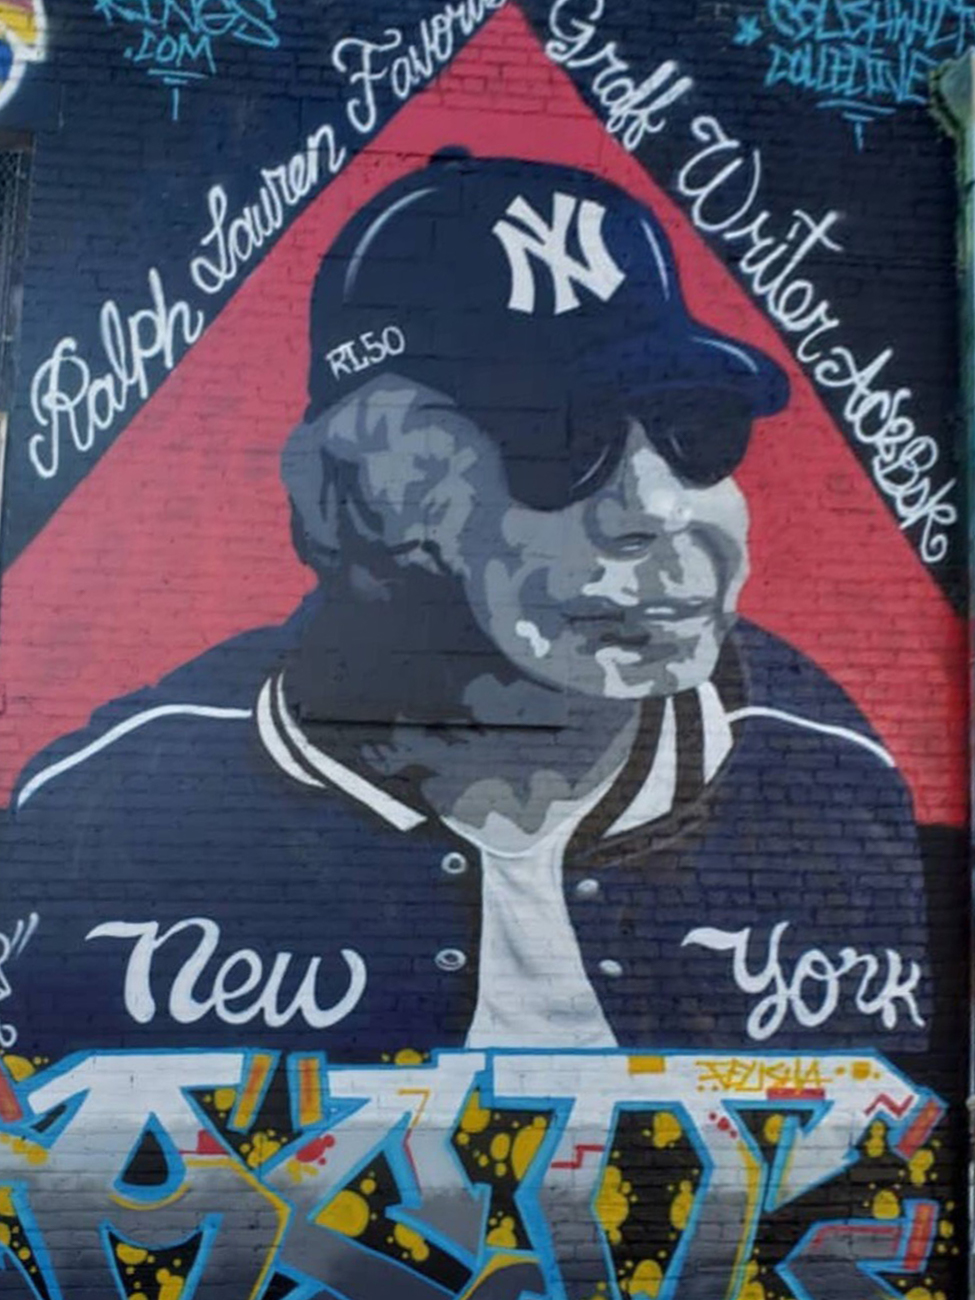 AC2BSK’s latest creation: a 20-foot-tall image of Ralph Lauren in a Ralph Lauren Yankees™ hat and jacket